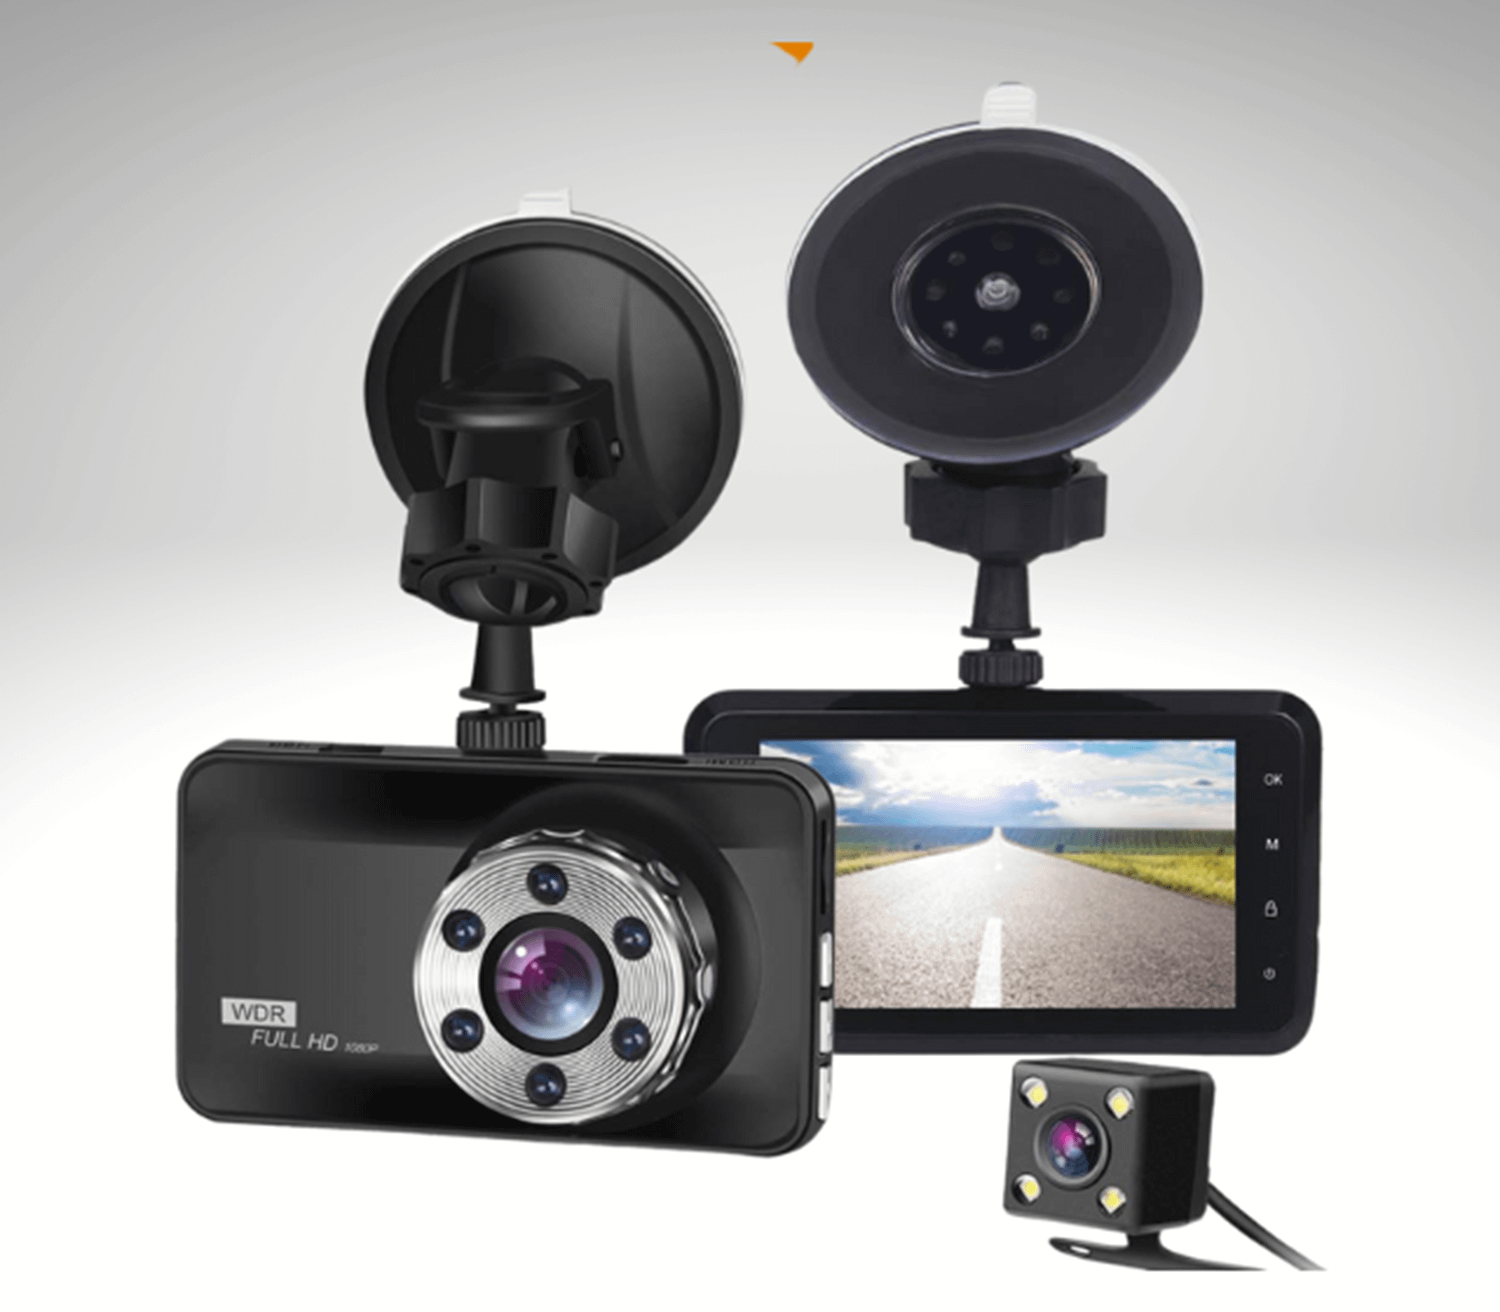 The best dash cams of 2019